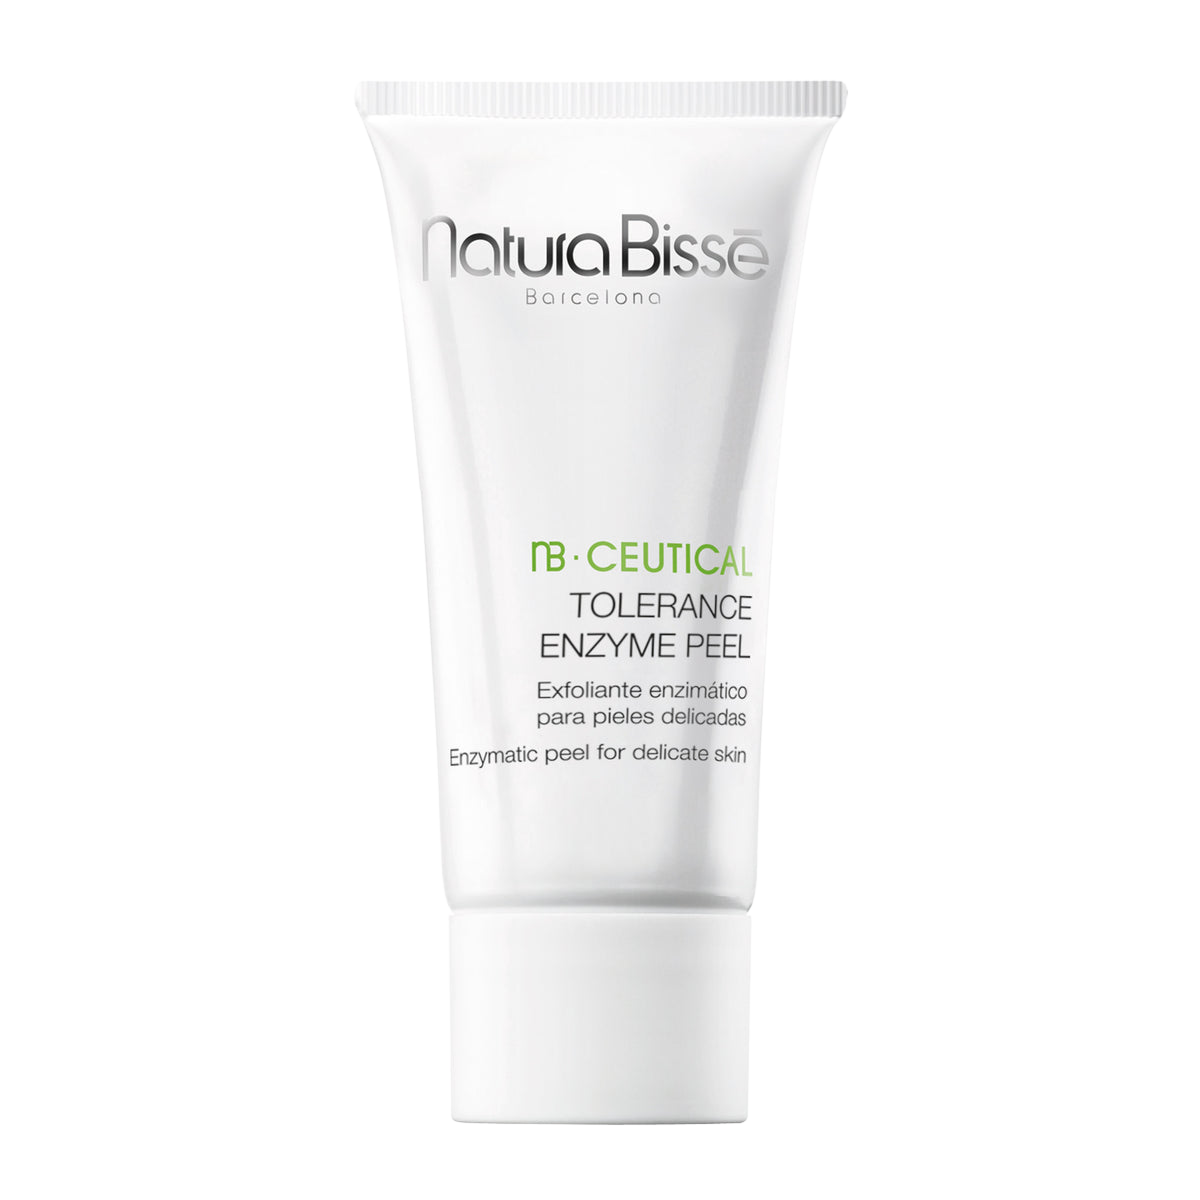 Load image into Gallery viewer, Natura Bissé NB Ceutical Tolerance Enzyme Peel
